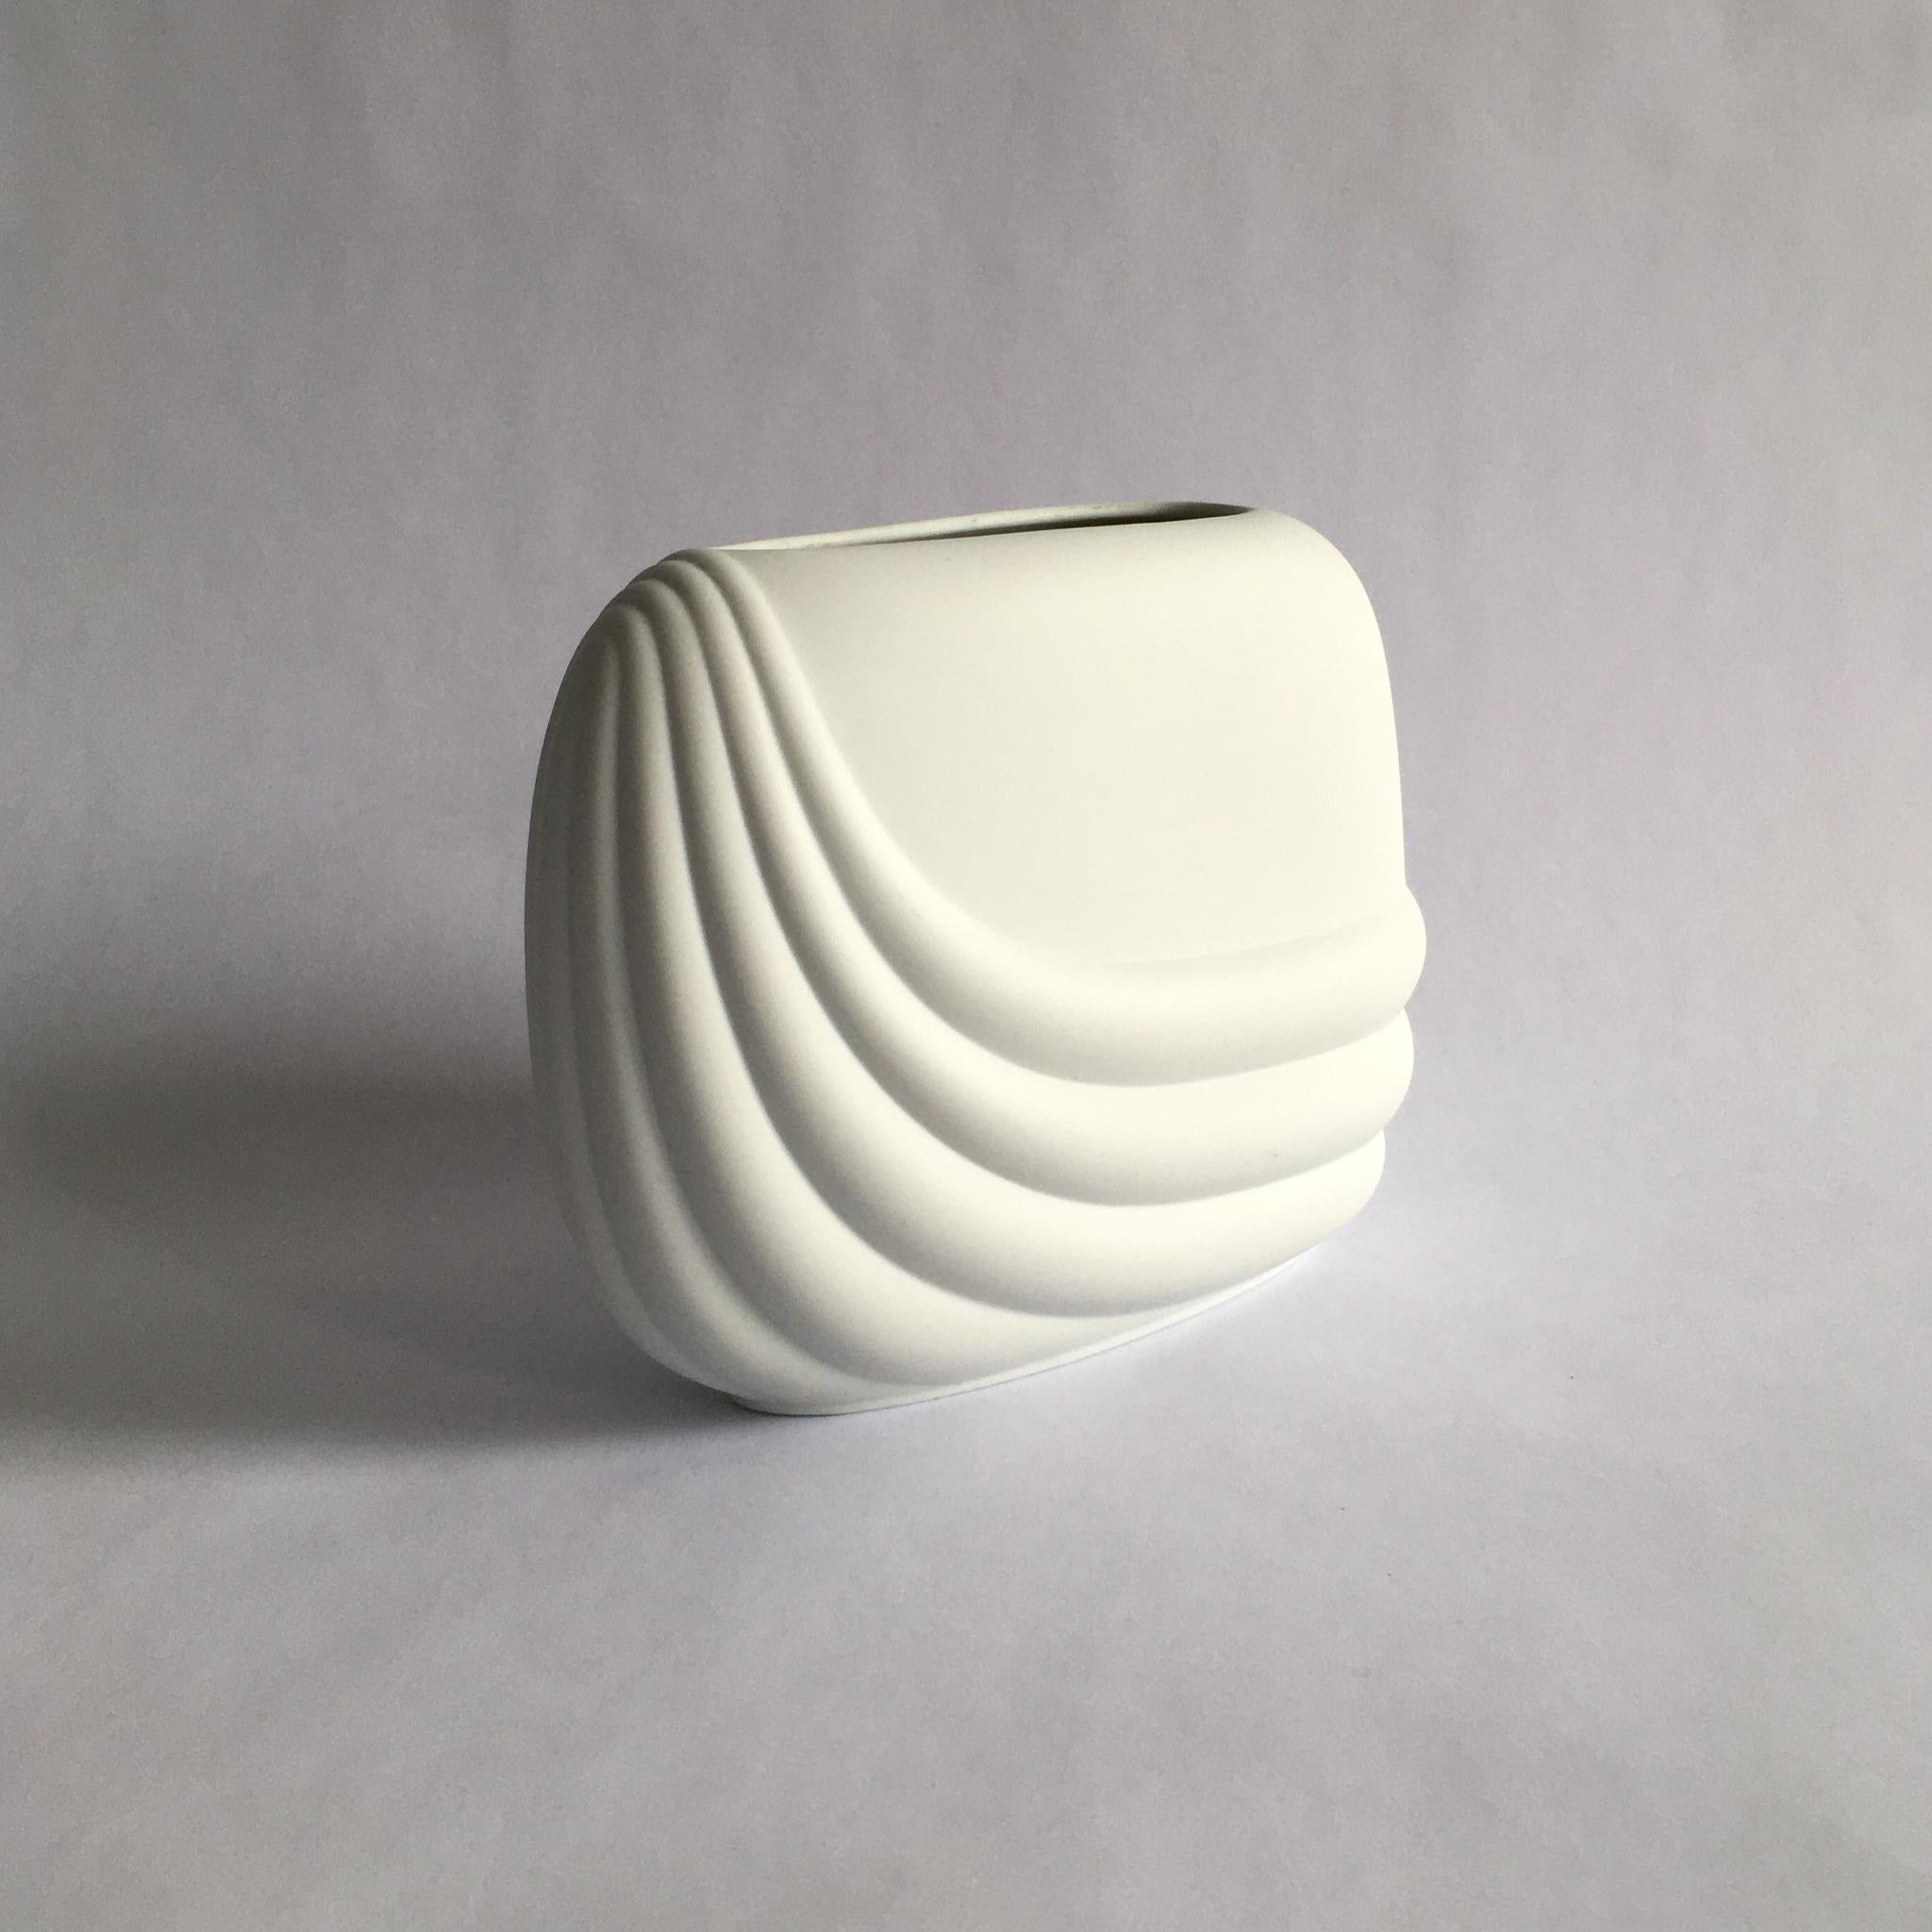 Mid-Century Modern Rosenthal Studio Line by Uta Feyl, White Curved Geometric Porcelain Bisque Vase For Sale